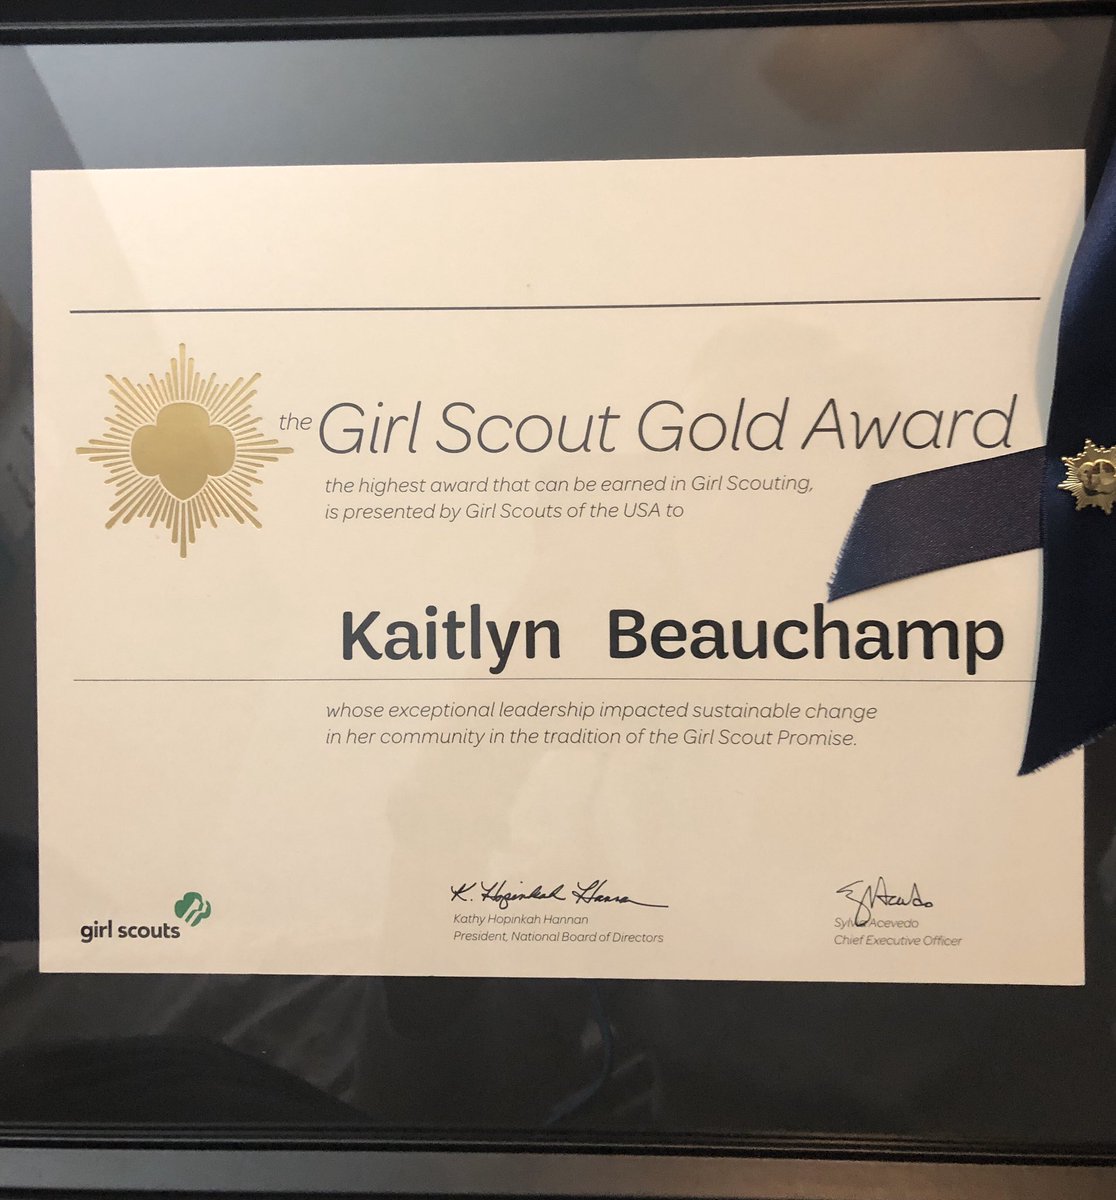 On March 1st,  I became apart of the 5.4% of Girl Scouts who earn the Gold Award! As of today I’m officially a Girl Scout Gold Award Member!! ❤️ Thank you to everyone has helped me along the way!! #gsgoldaward @GirlScoutsWOH @girlscouts